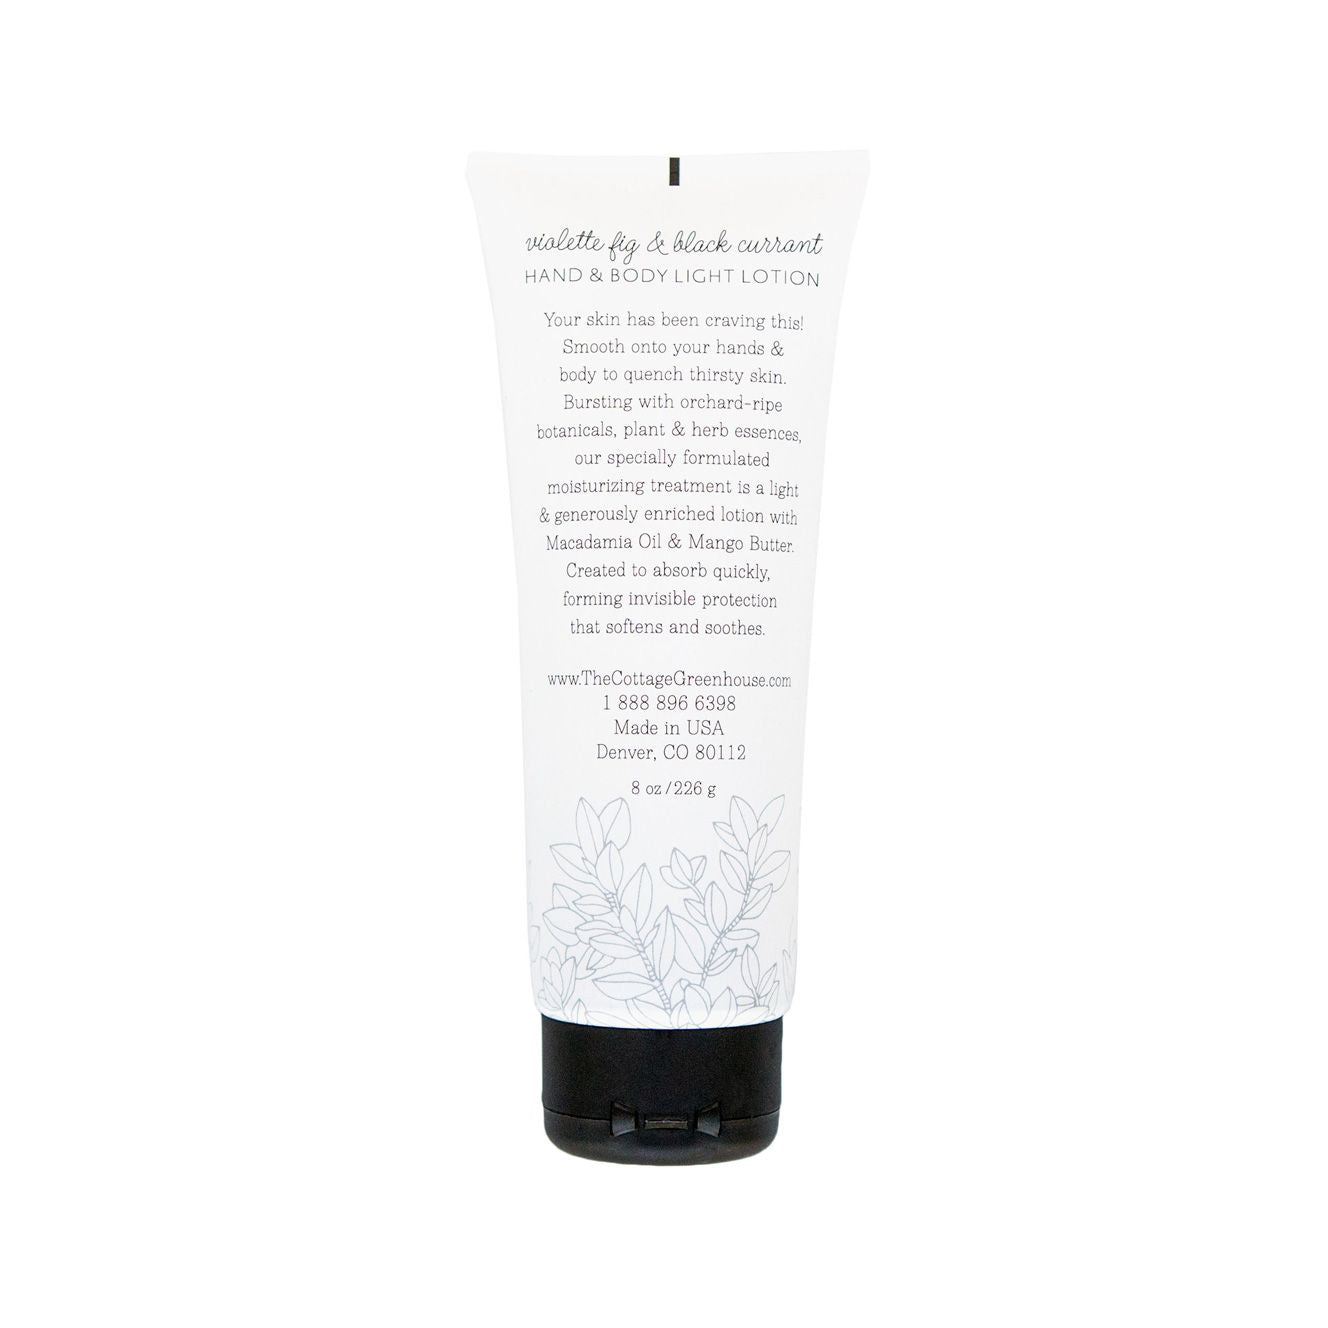 The Cottage Greenhouse Violette Fig + Black Currant Hand & Body Light Lotion